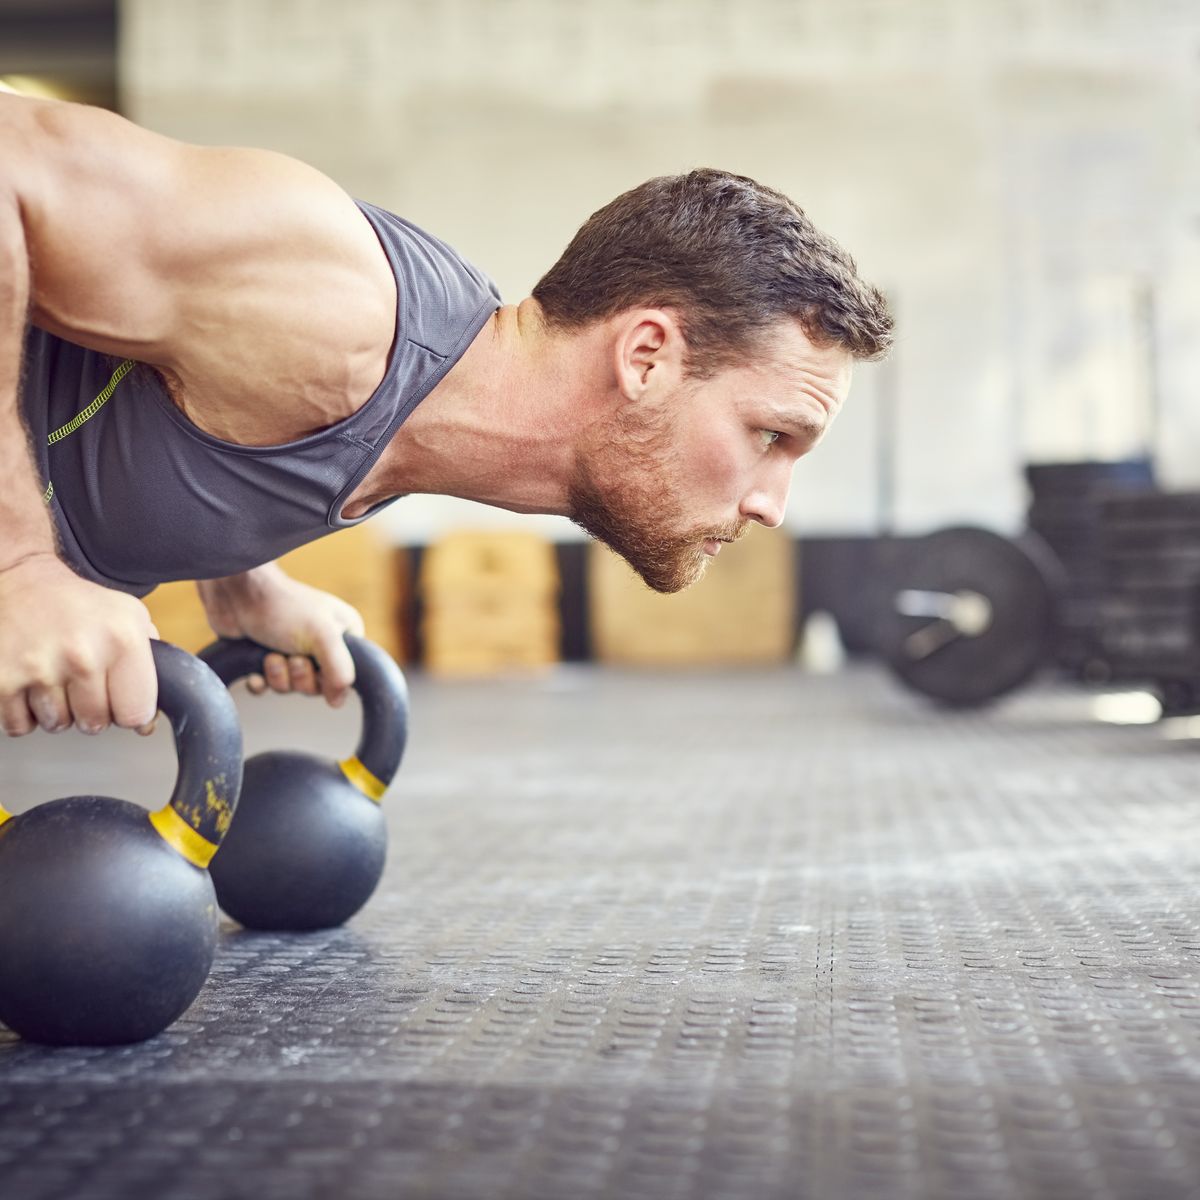 https://hips.hearstapps.com/hmg-prod/images/determined-athlete-doing-push-ups-on-kettlebells-in-royalty-free-image-1585654820.jpg?crop=0.652xw:1.00xh;0.0321xw,0&resize=1200:*